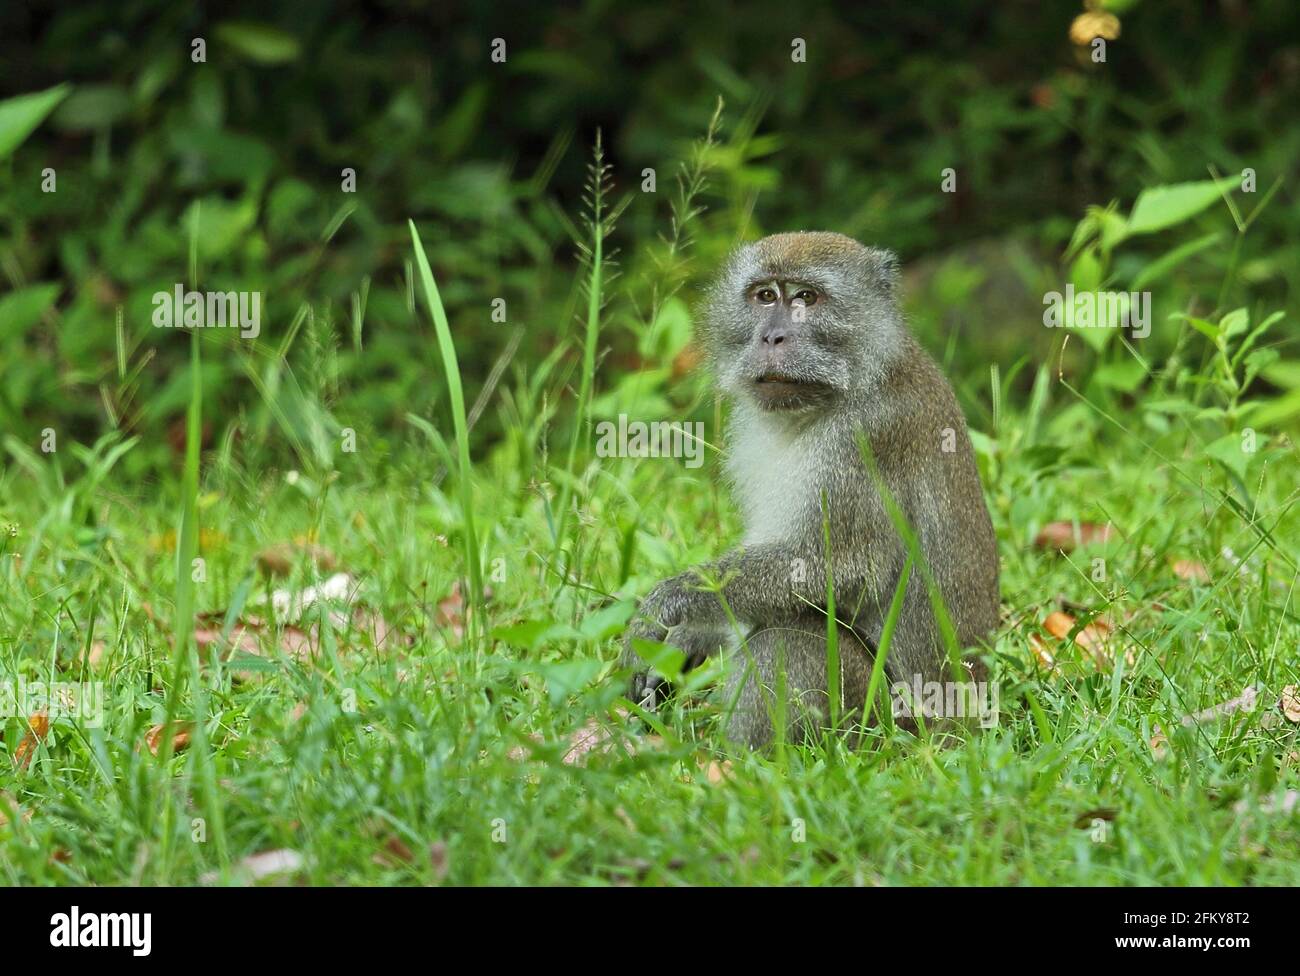 Long-tailed Macaque (Macaca fascicularis fascicularis) adult sitting in grassy clearing Way Kambas NP, Sumatra, Indonesia         June Stock Photo